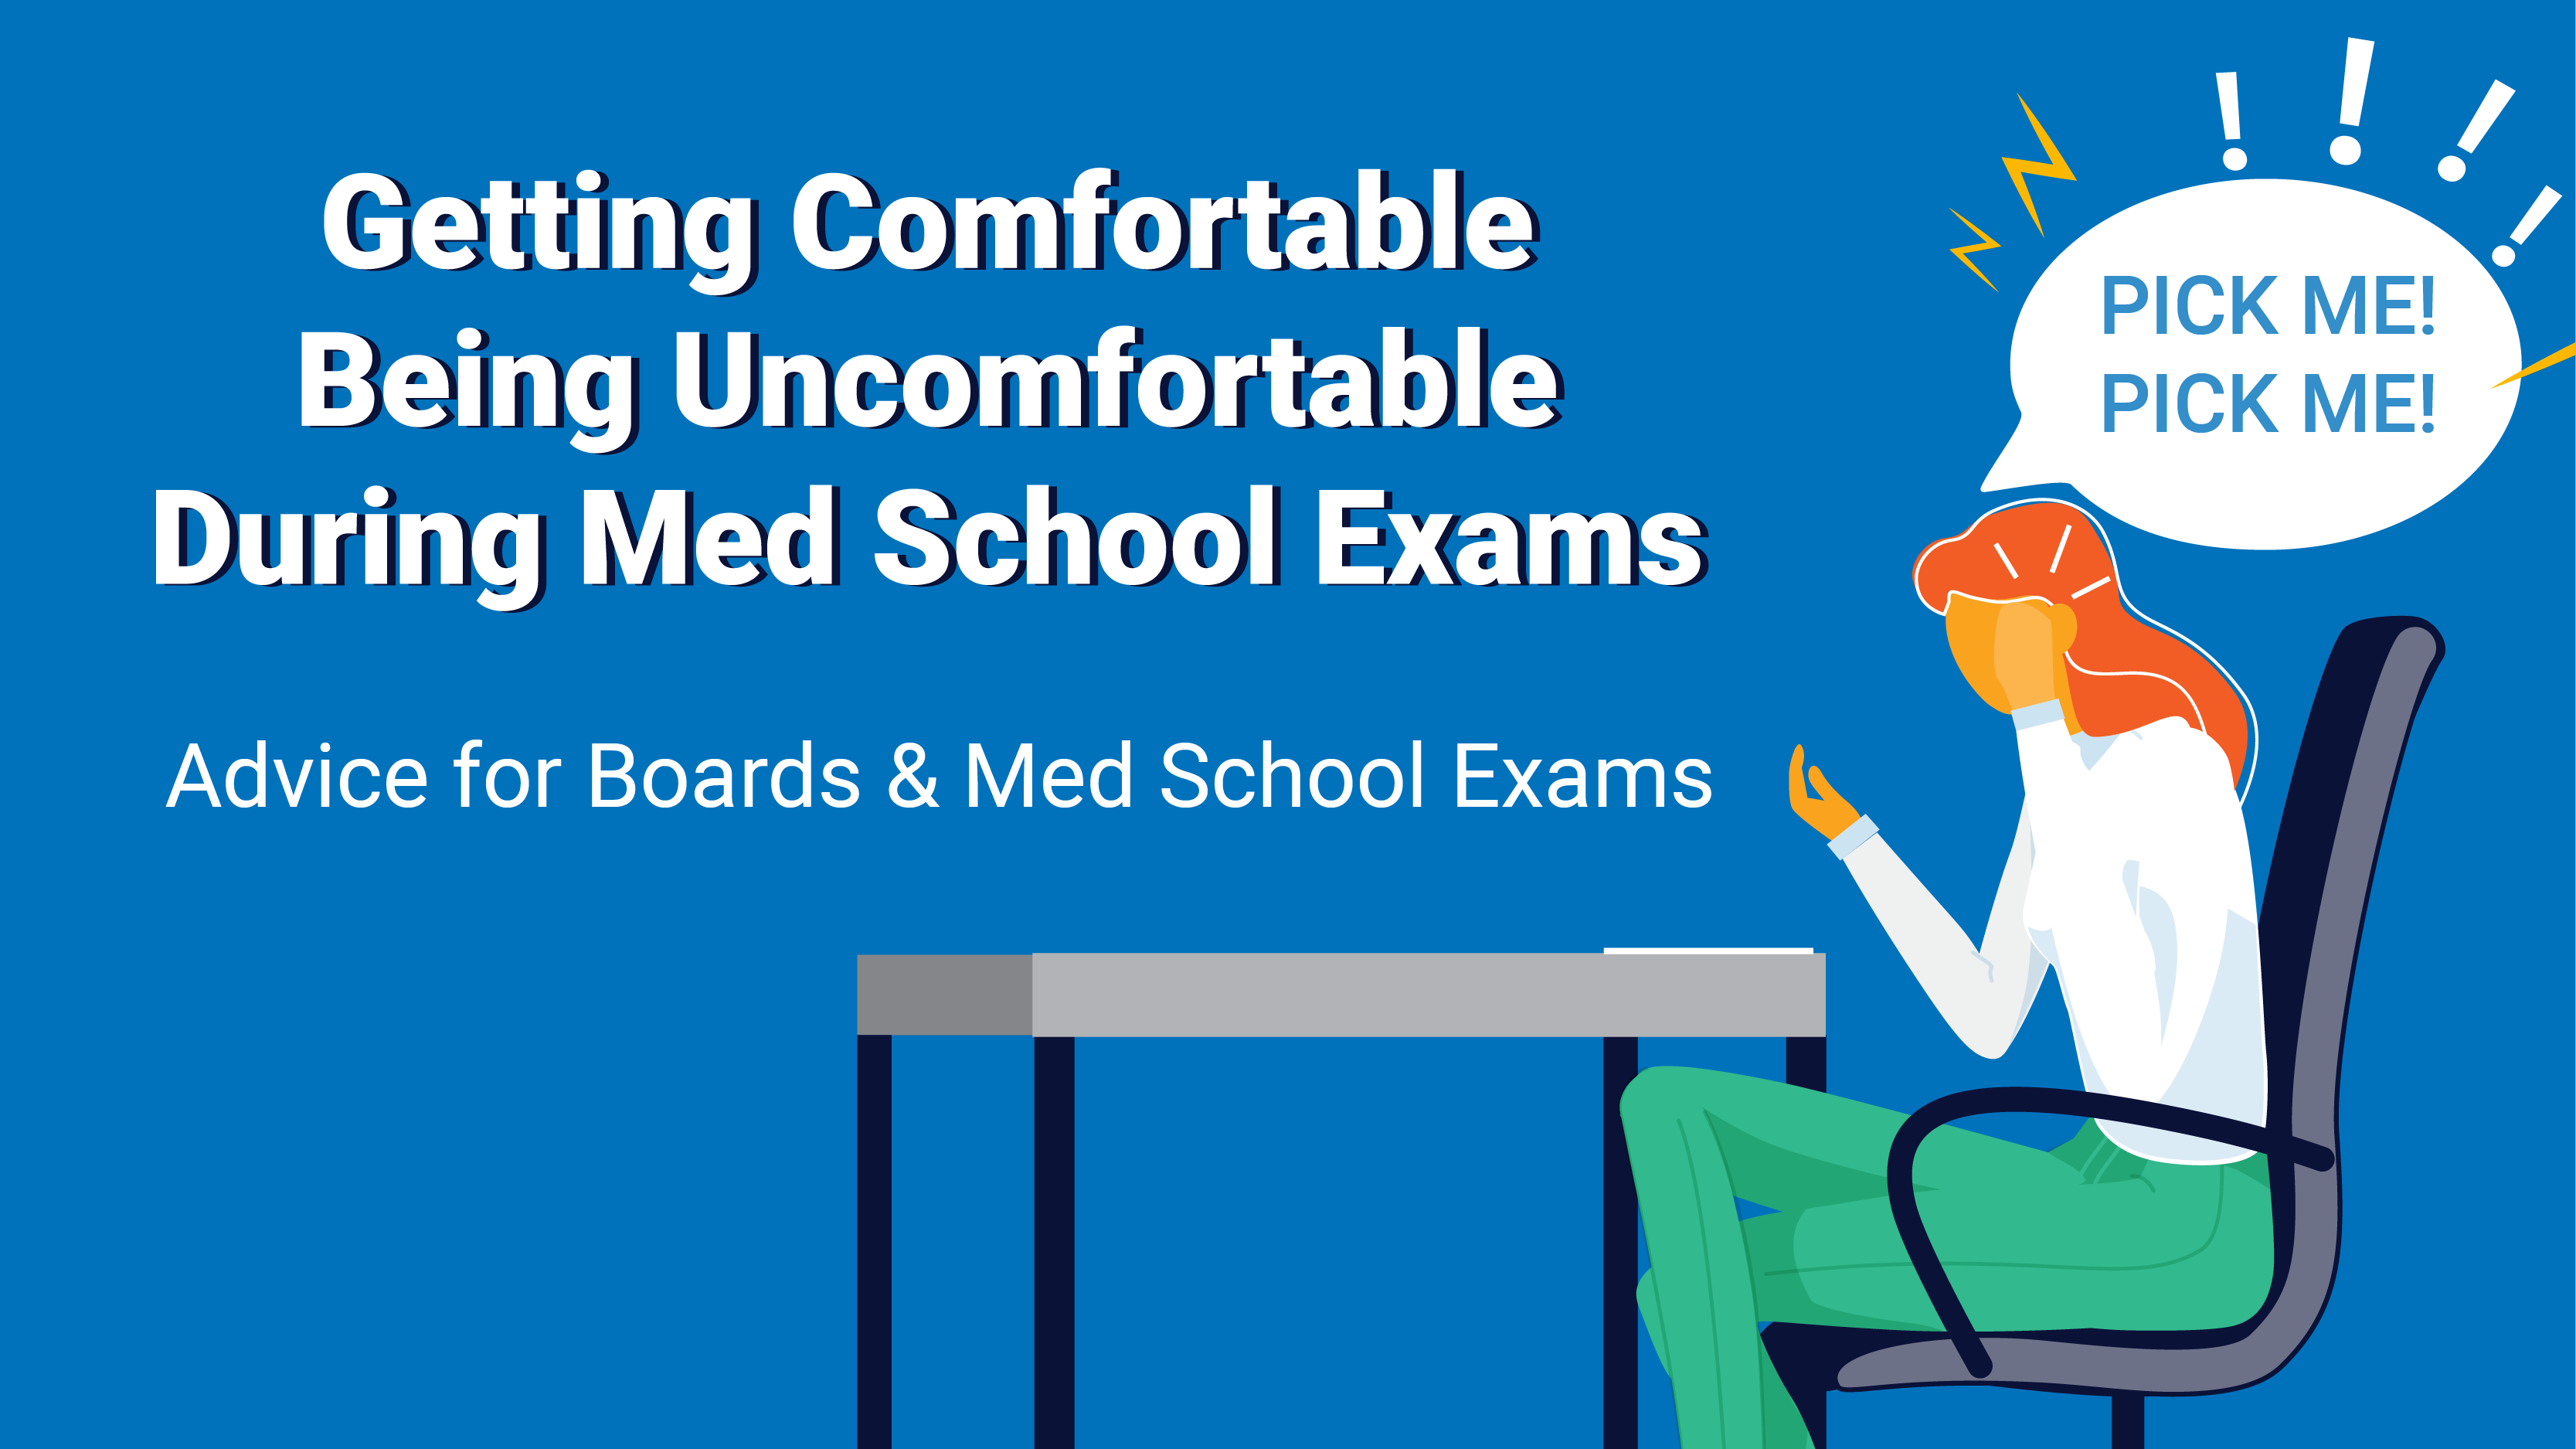 Featured image for “Getting Comfortable Being Uncomfortable During Med School Exams”